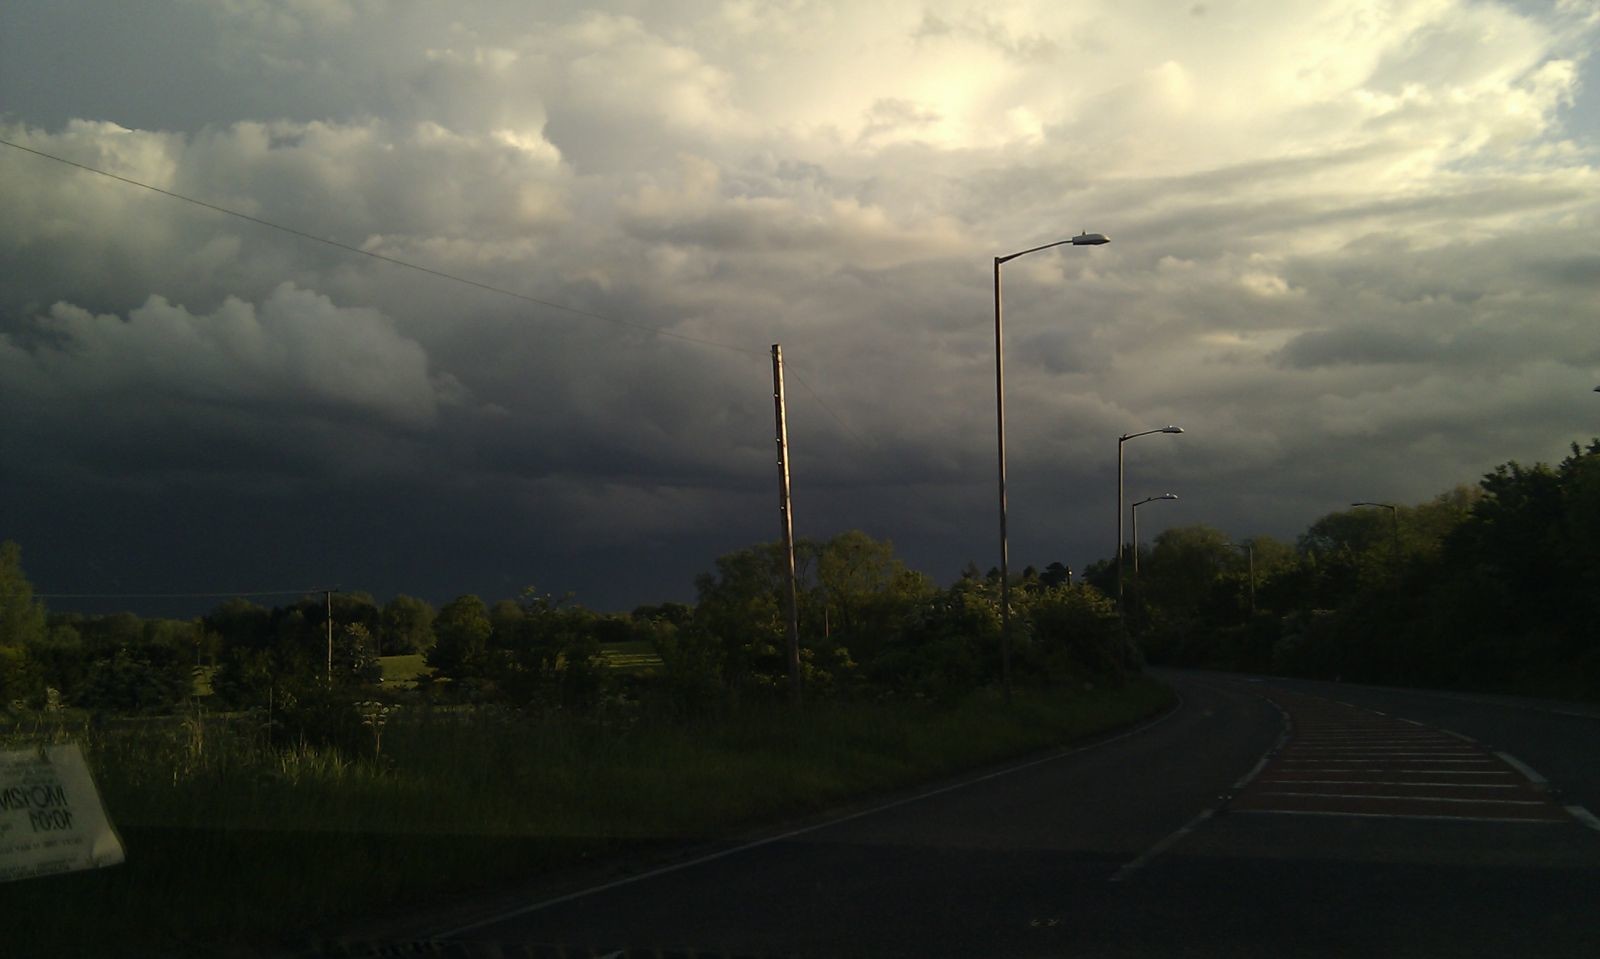 View towards thunderstorms in South Essex  - 1